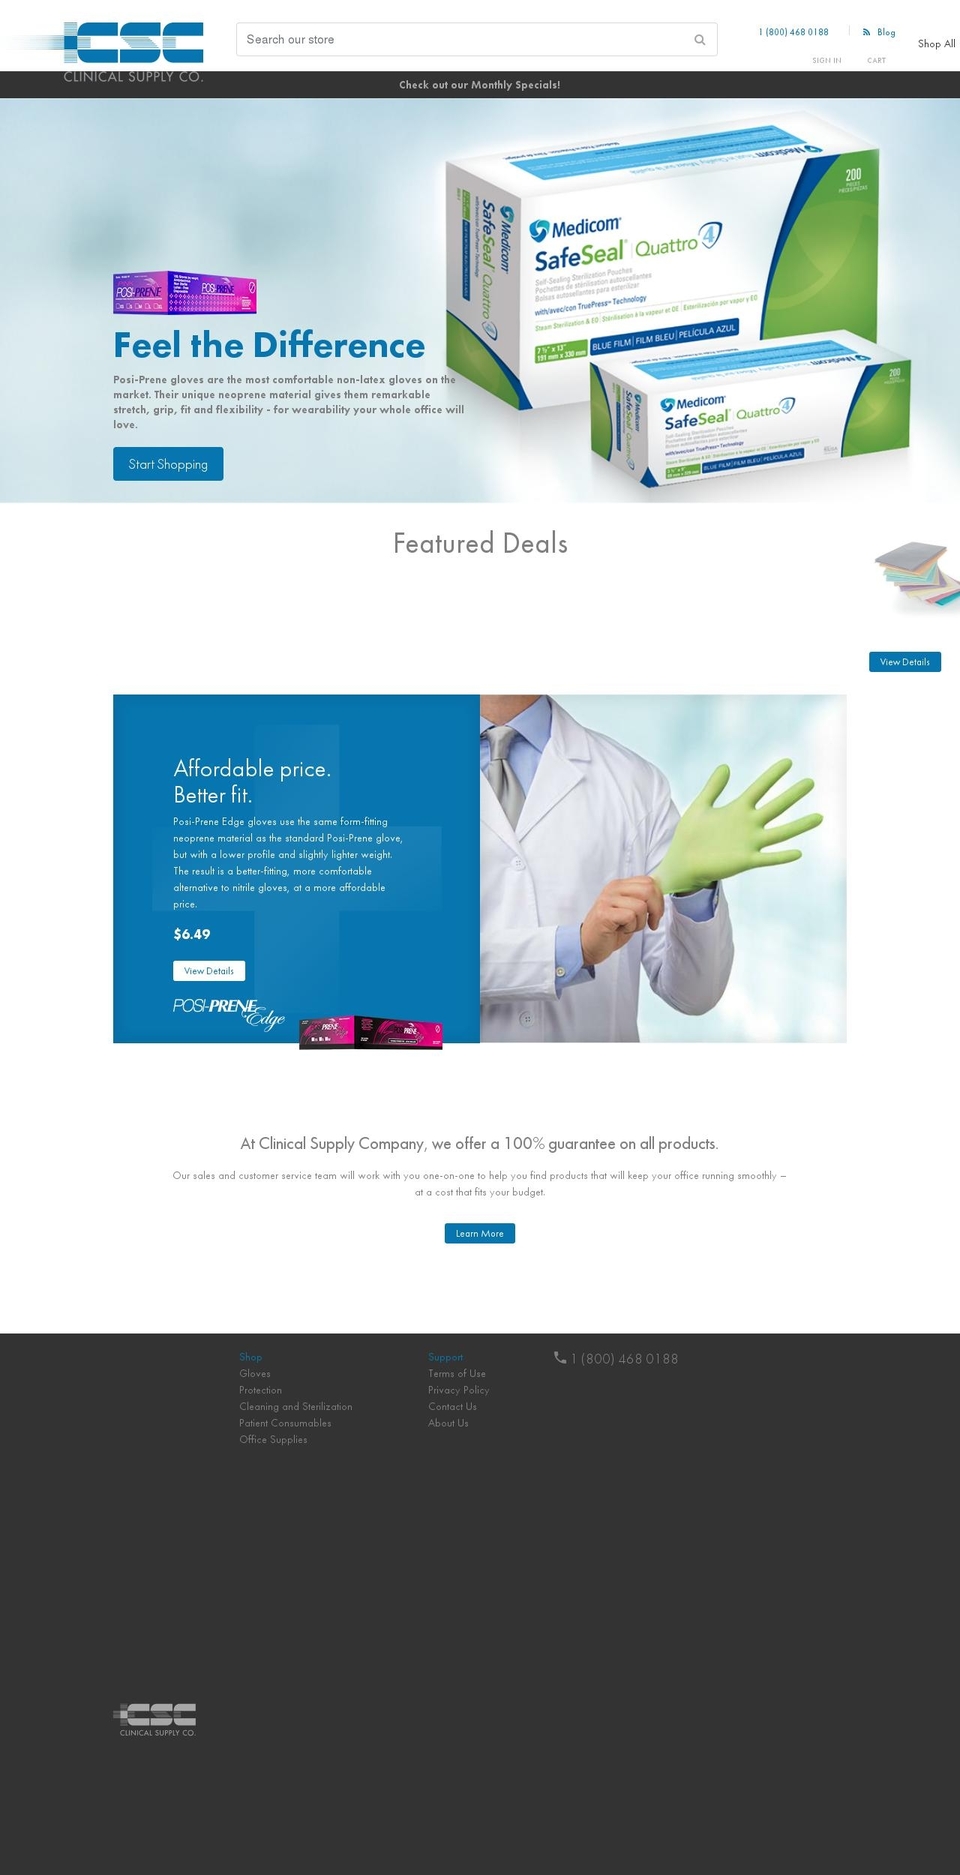 August Shopify theme site example clinicalsupplycompany.com